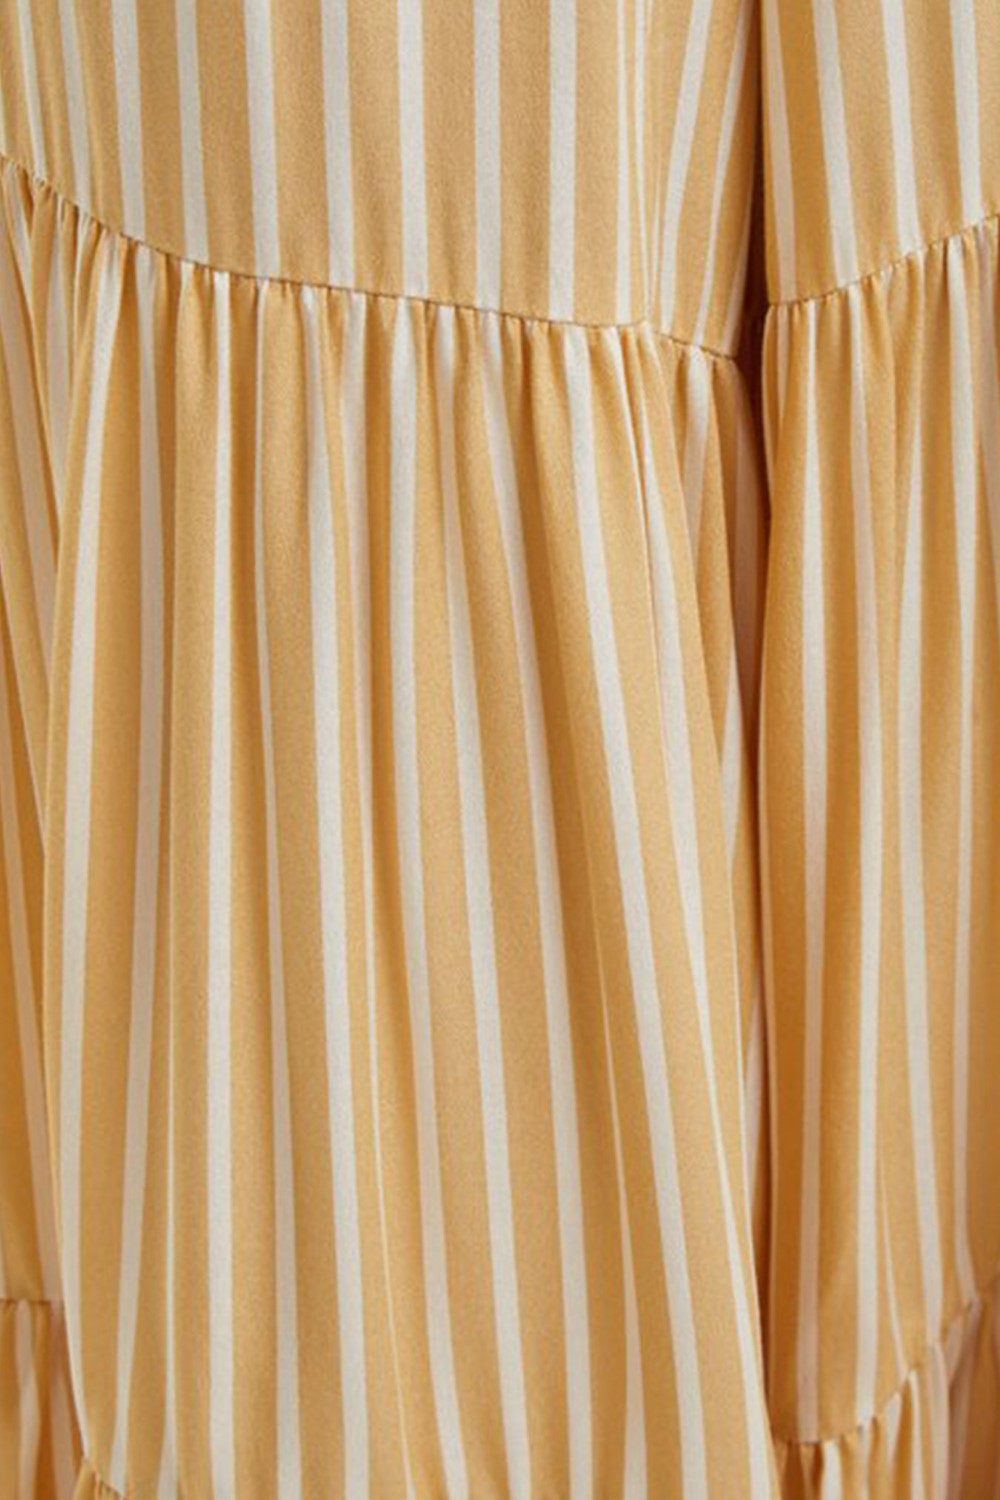 These wide-leg trousers are crafted from striped mid-weight fabric and get the Tropicalia mood of the ‘70s